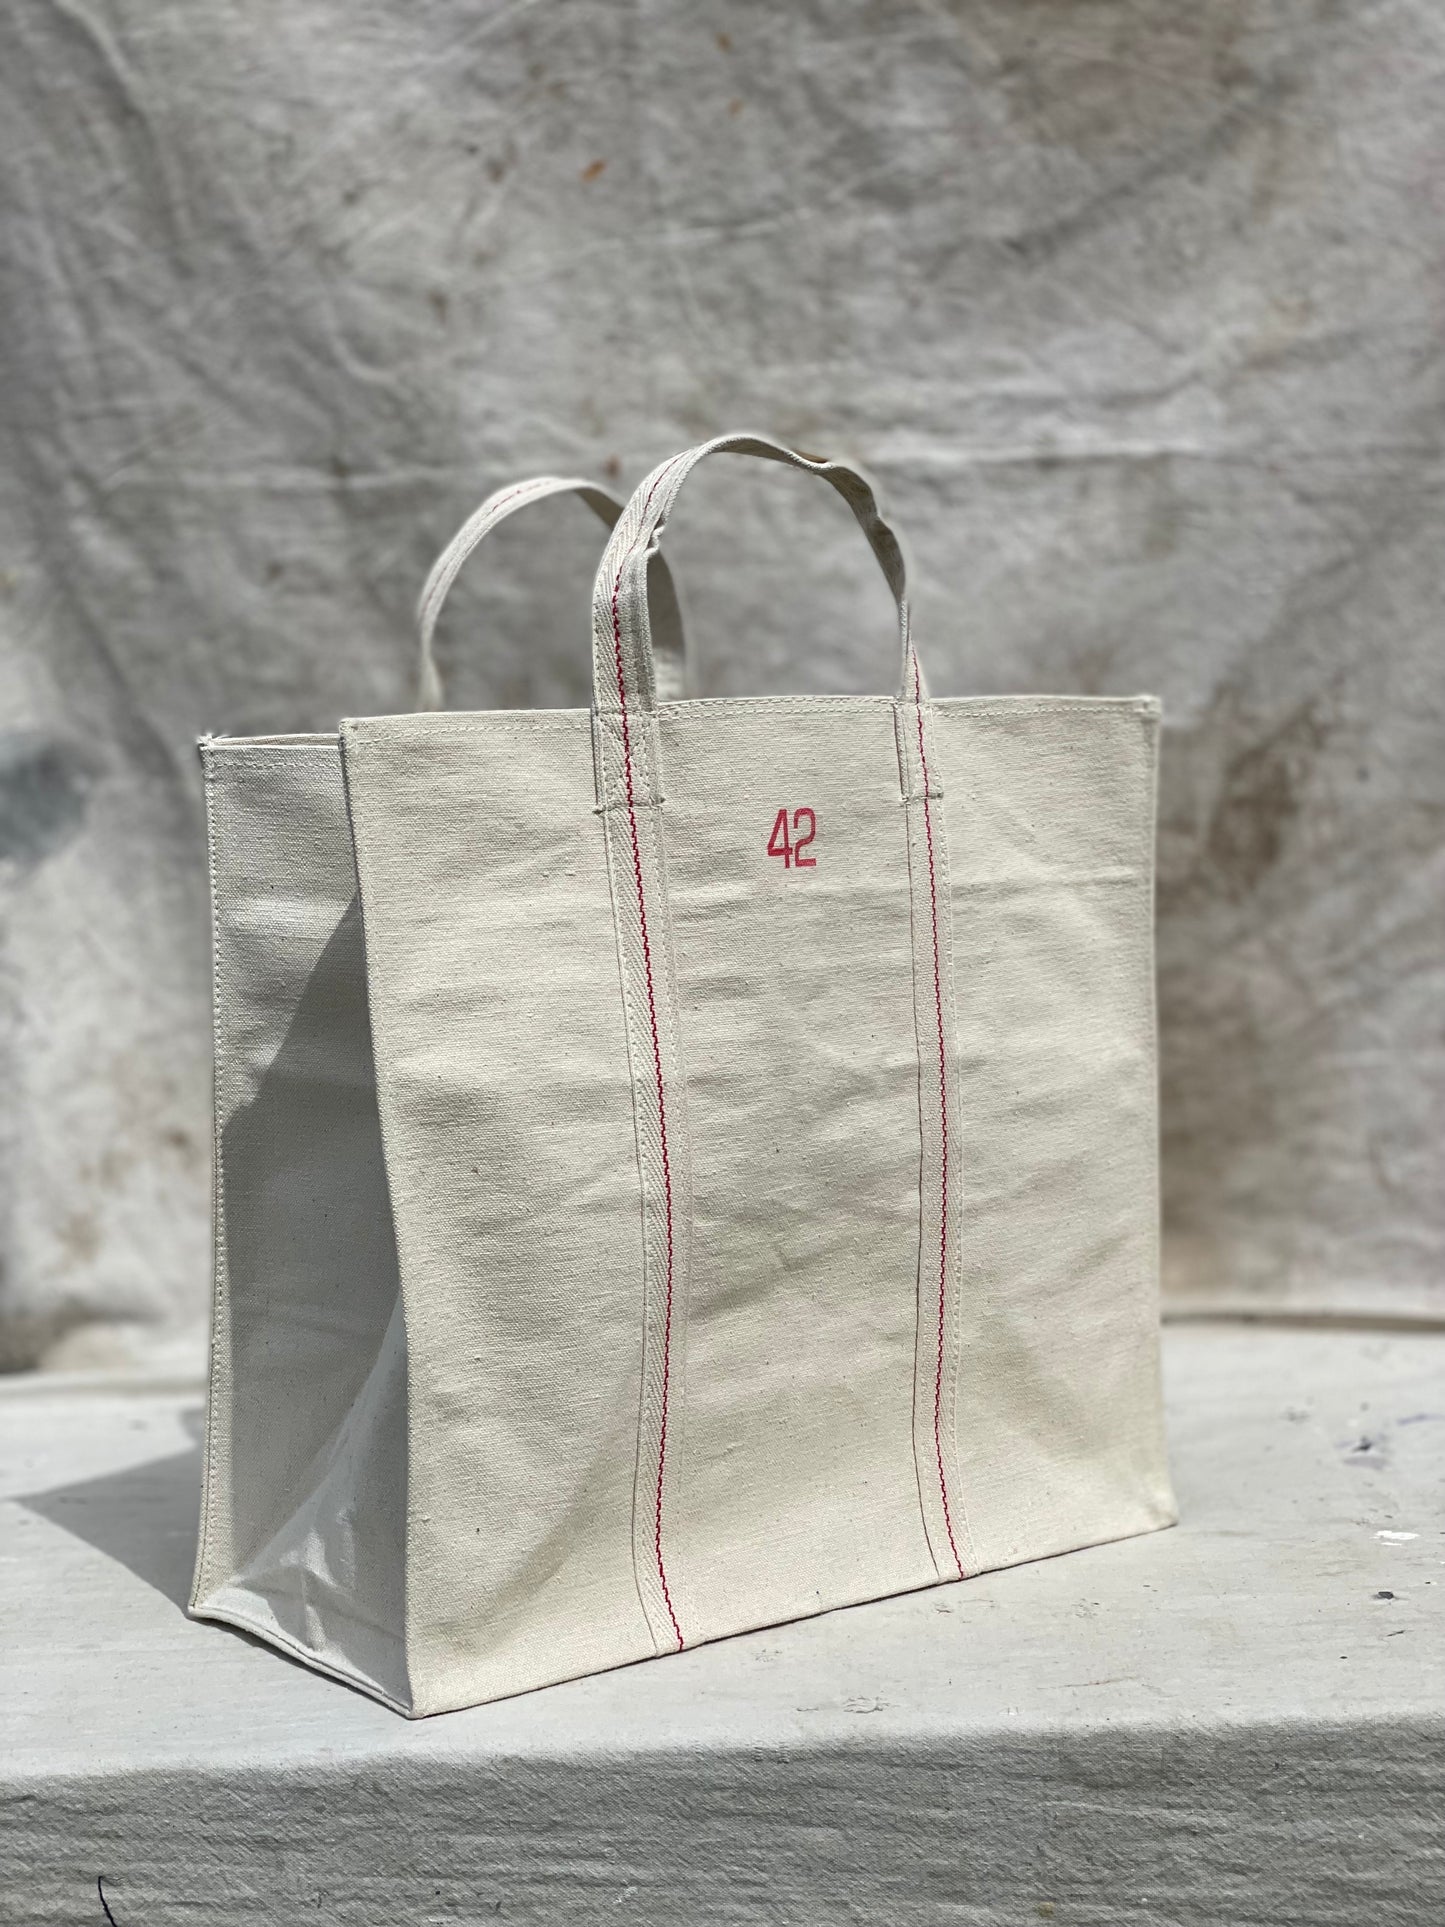 Heavy Duty Natural Canvas Tote Bag Size 42